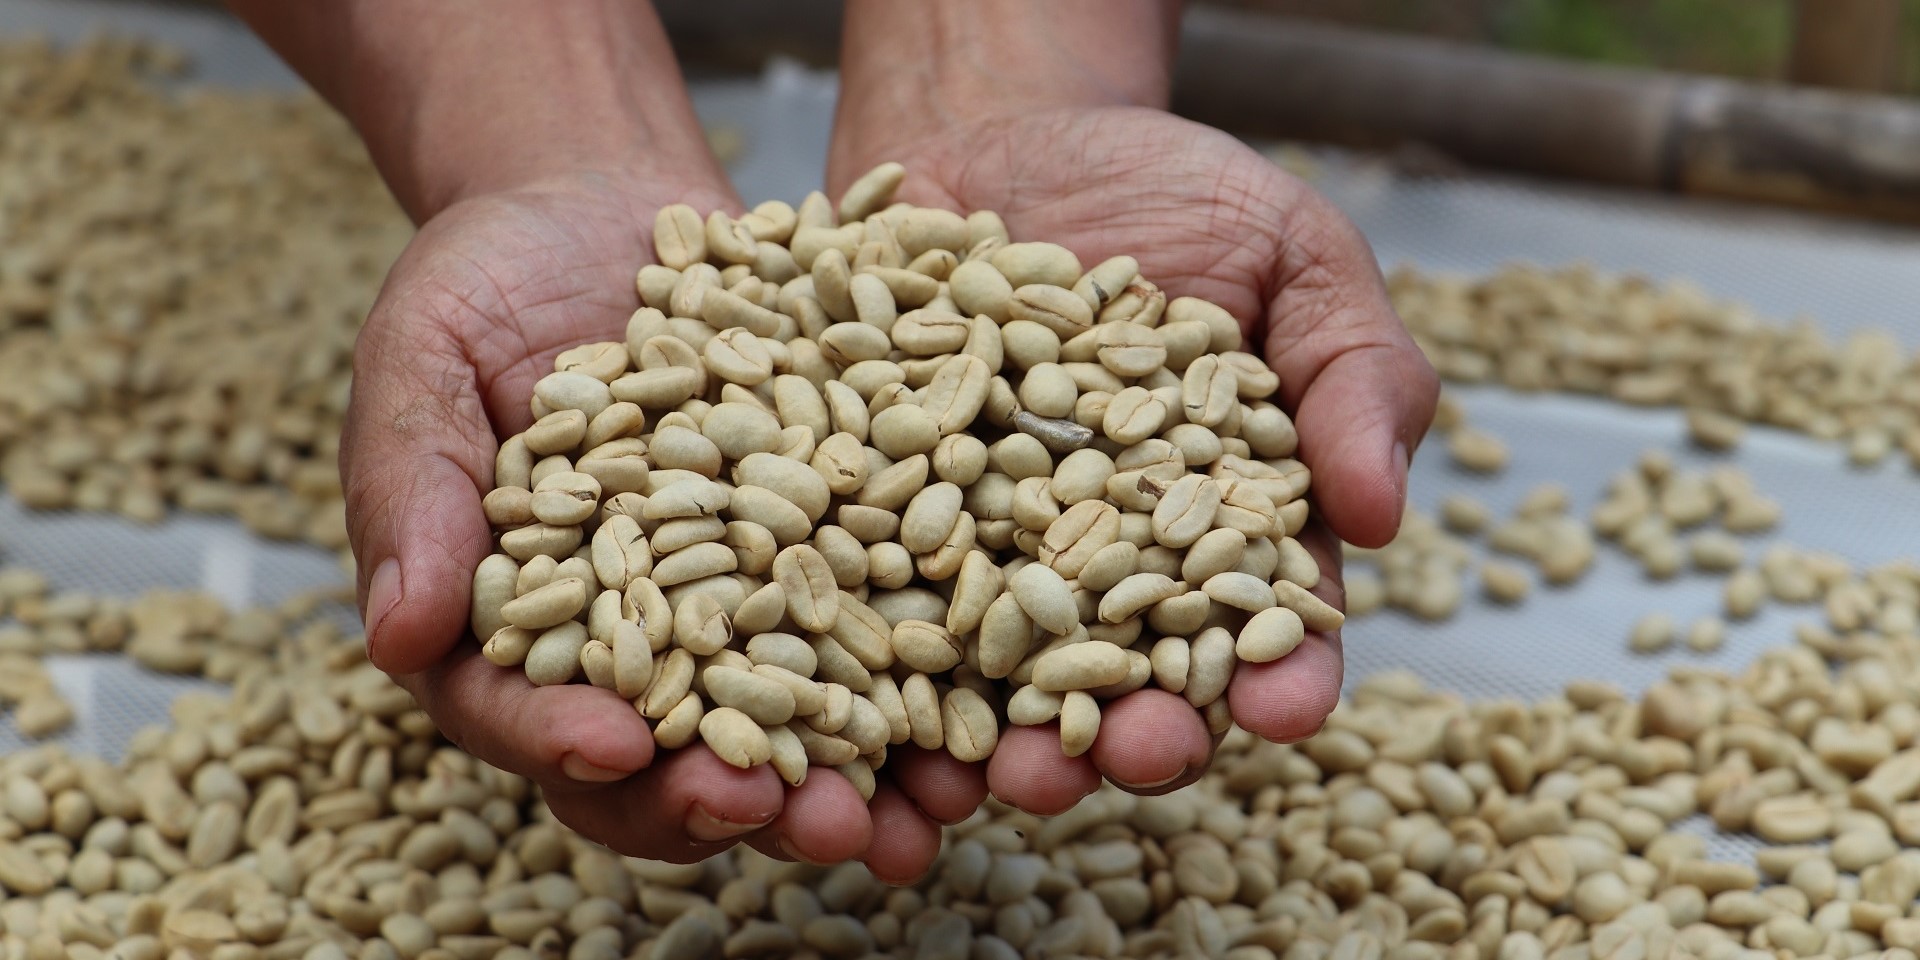 Hands holding raw coffee beans